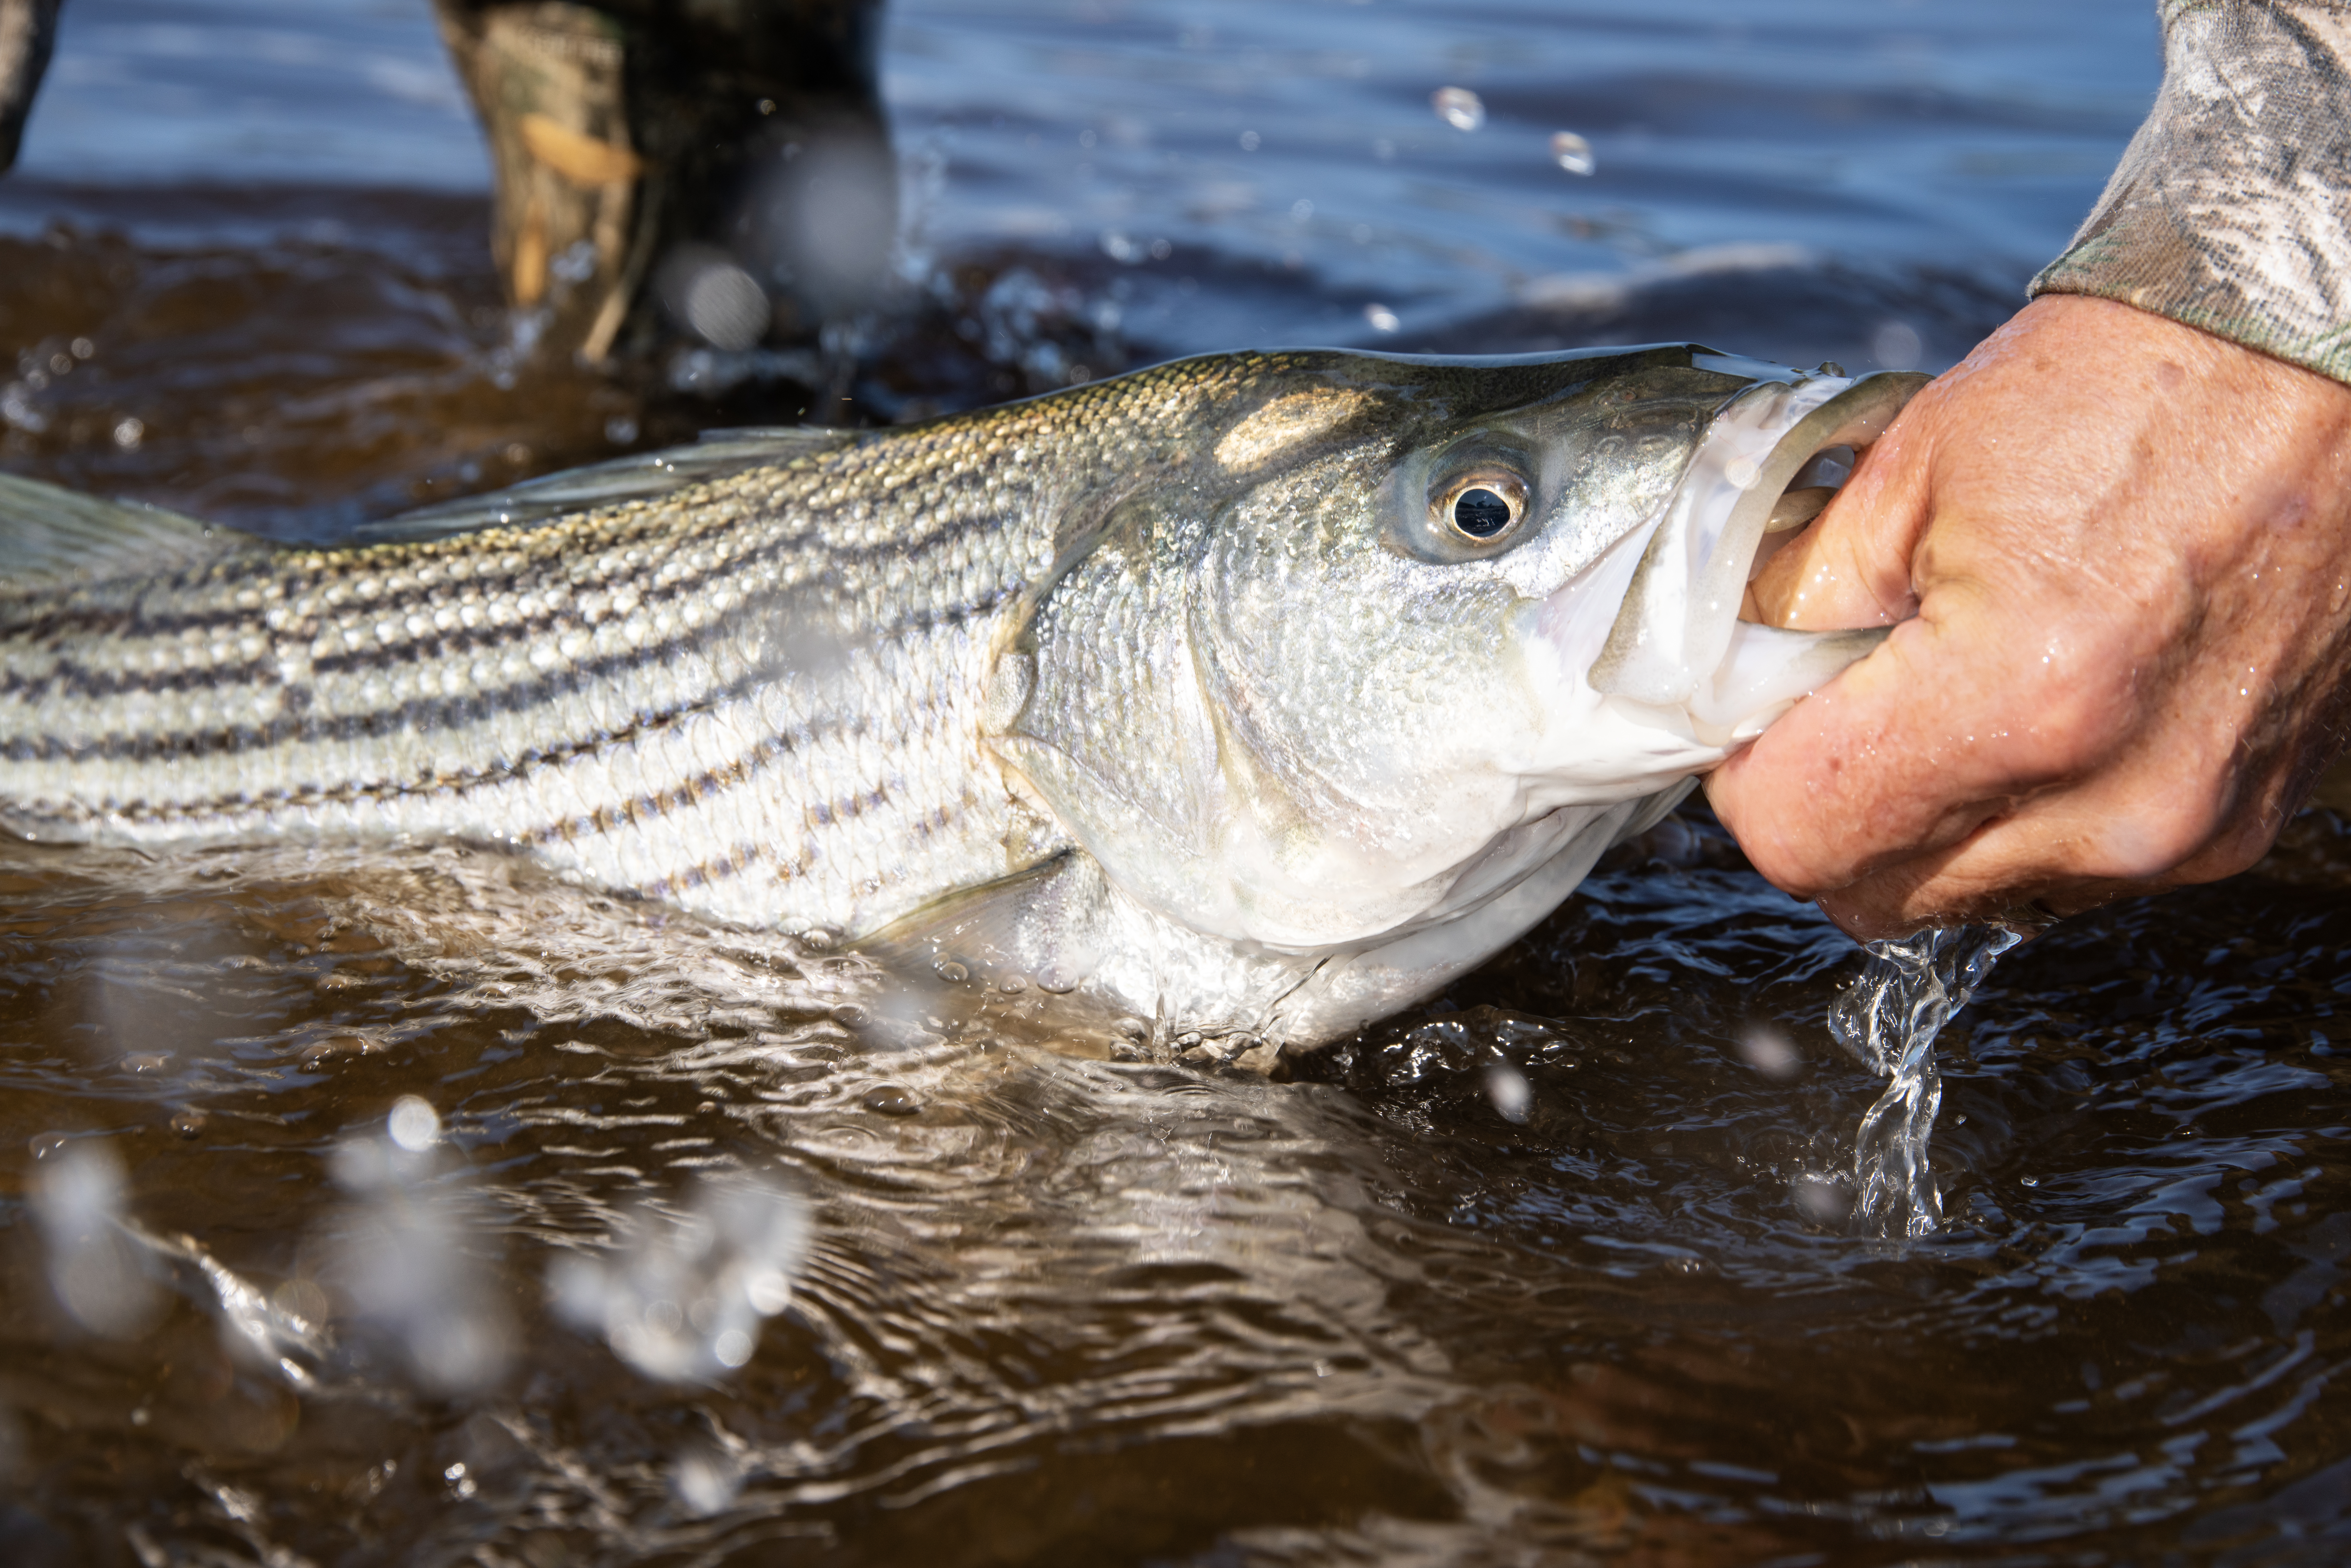 A striped bass being held by an angler prior to release.